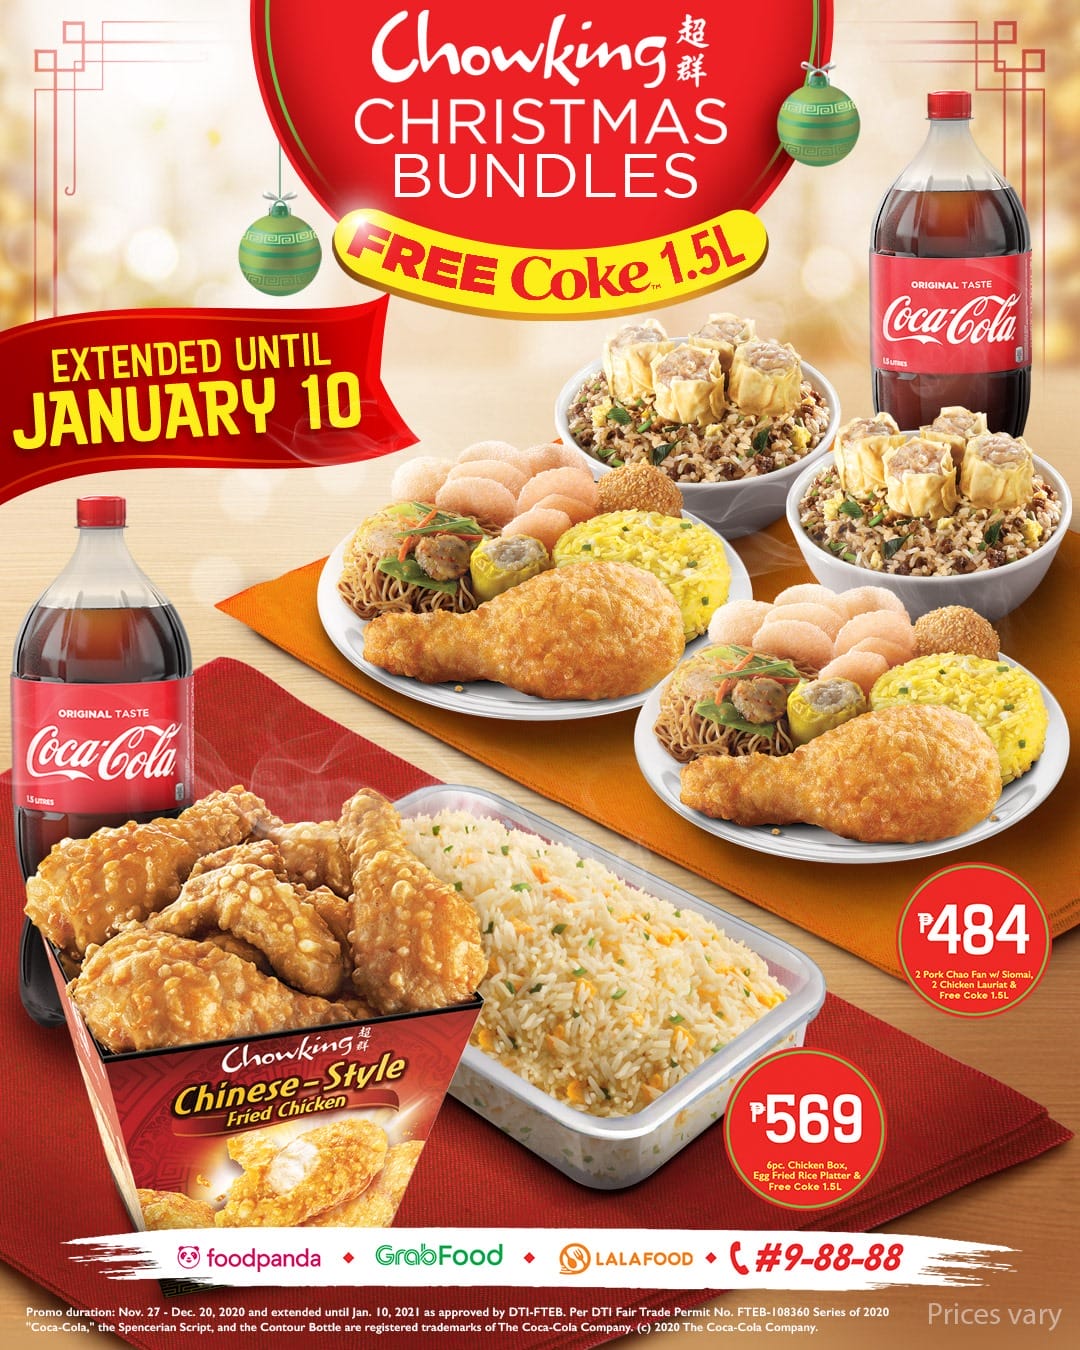 Chowking Christmas Bundles Extended Until January 10 Deals Pinoy